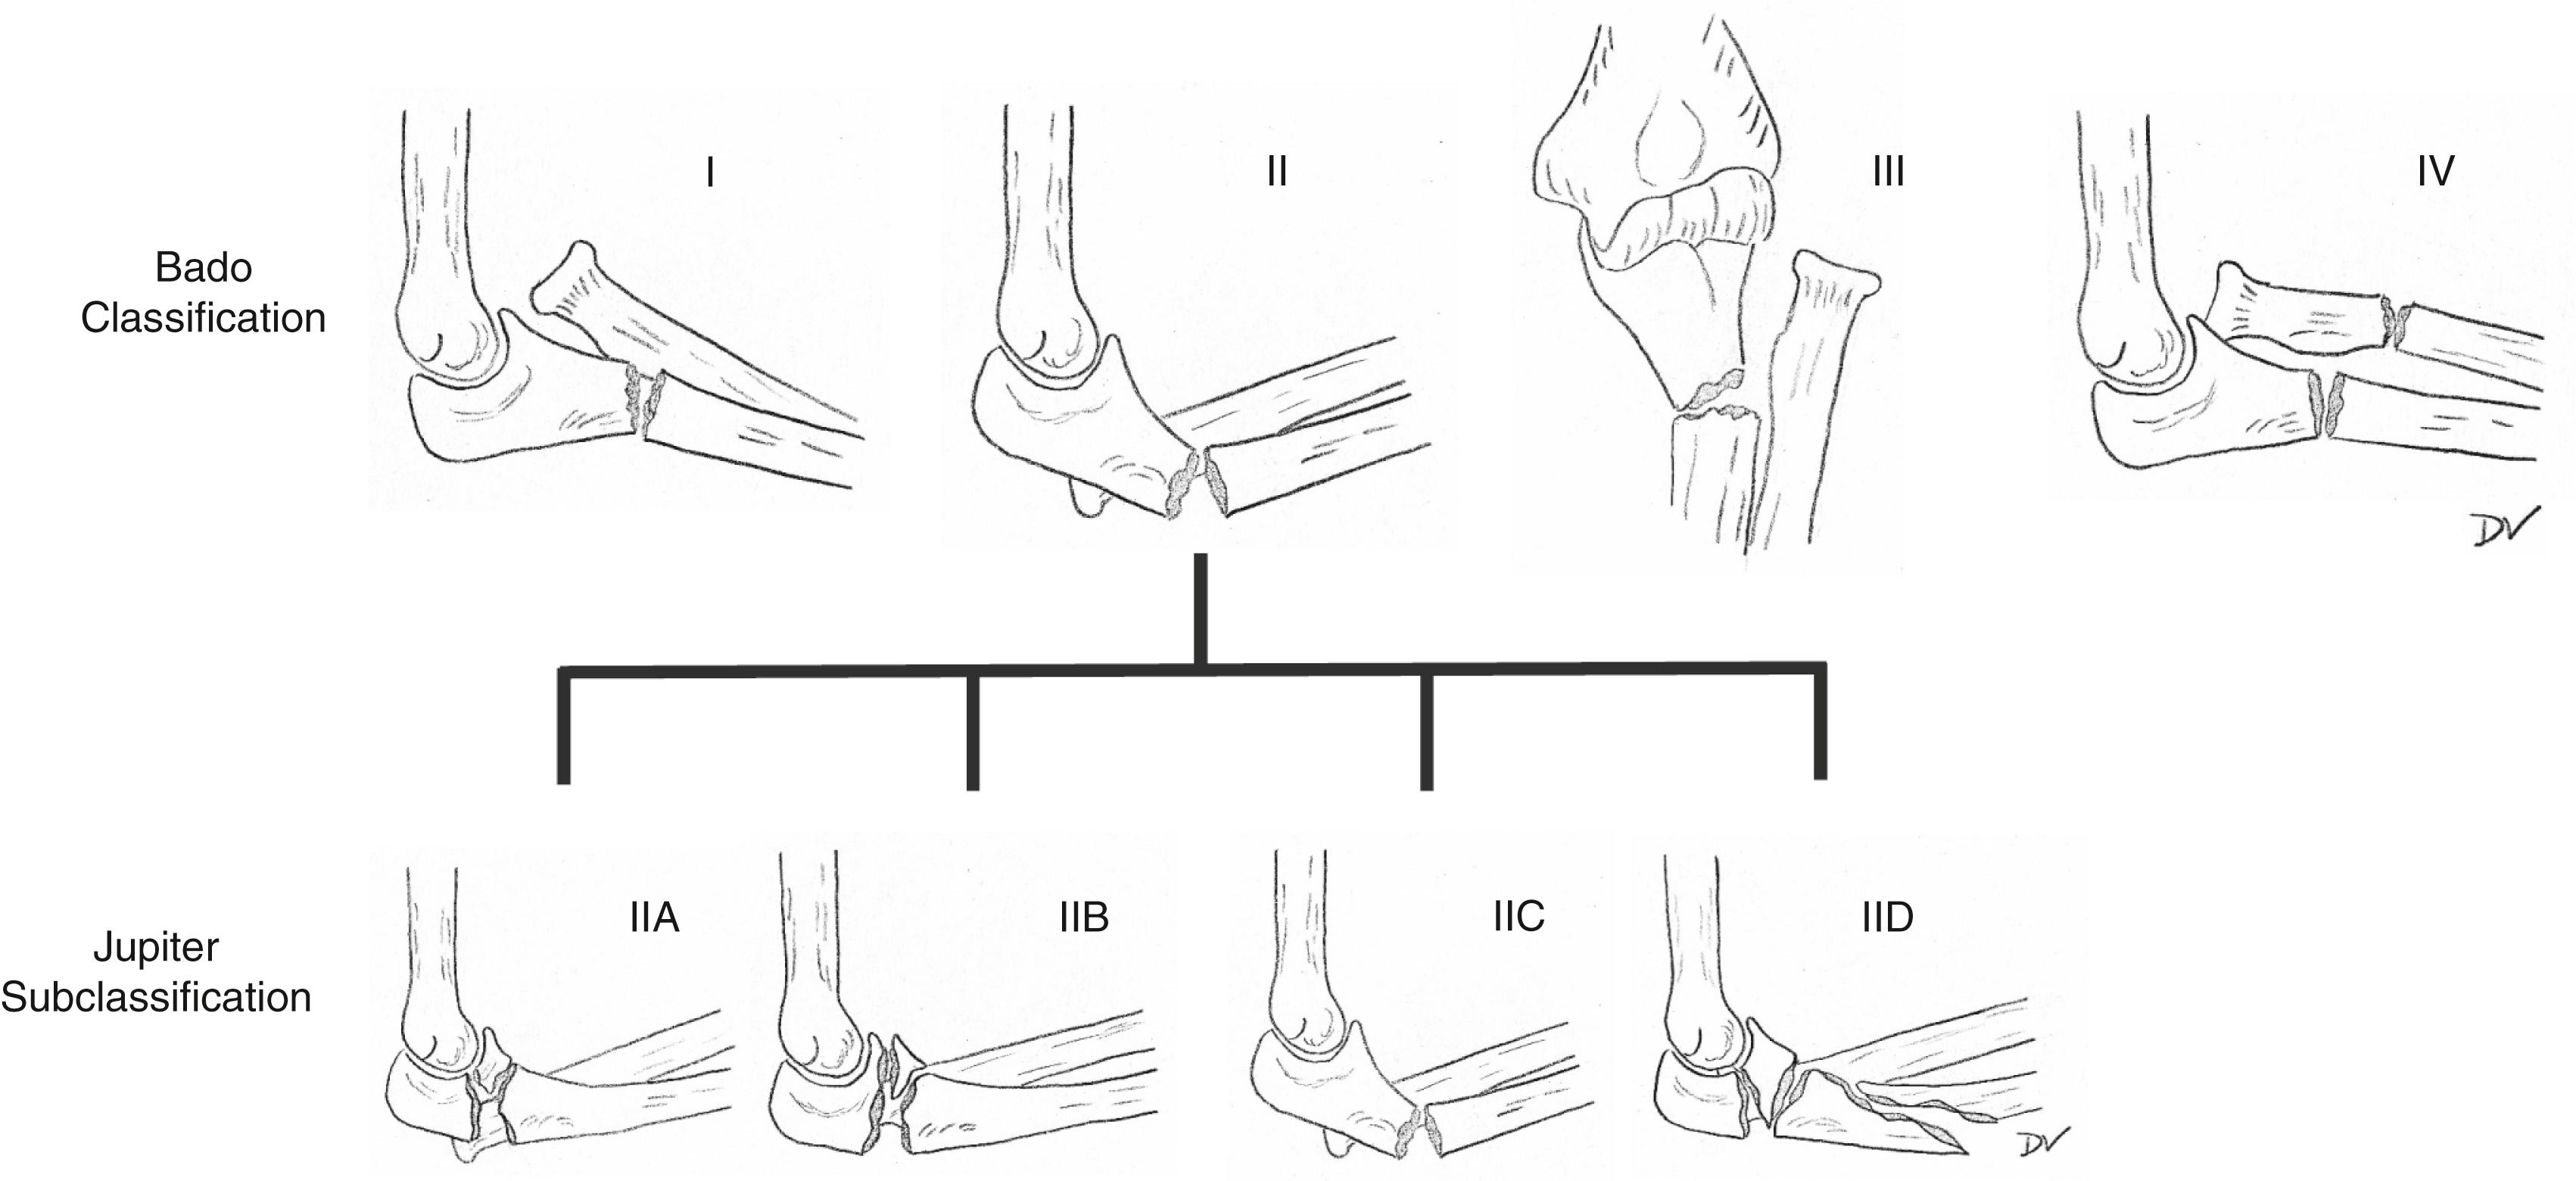 Fig. 51.3, Bado classification of Monteggia fractures with Jupiter subclassification of posterior Monteggia fractures.